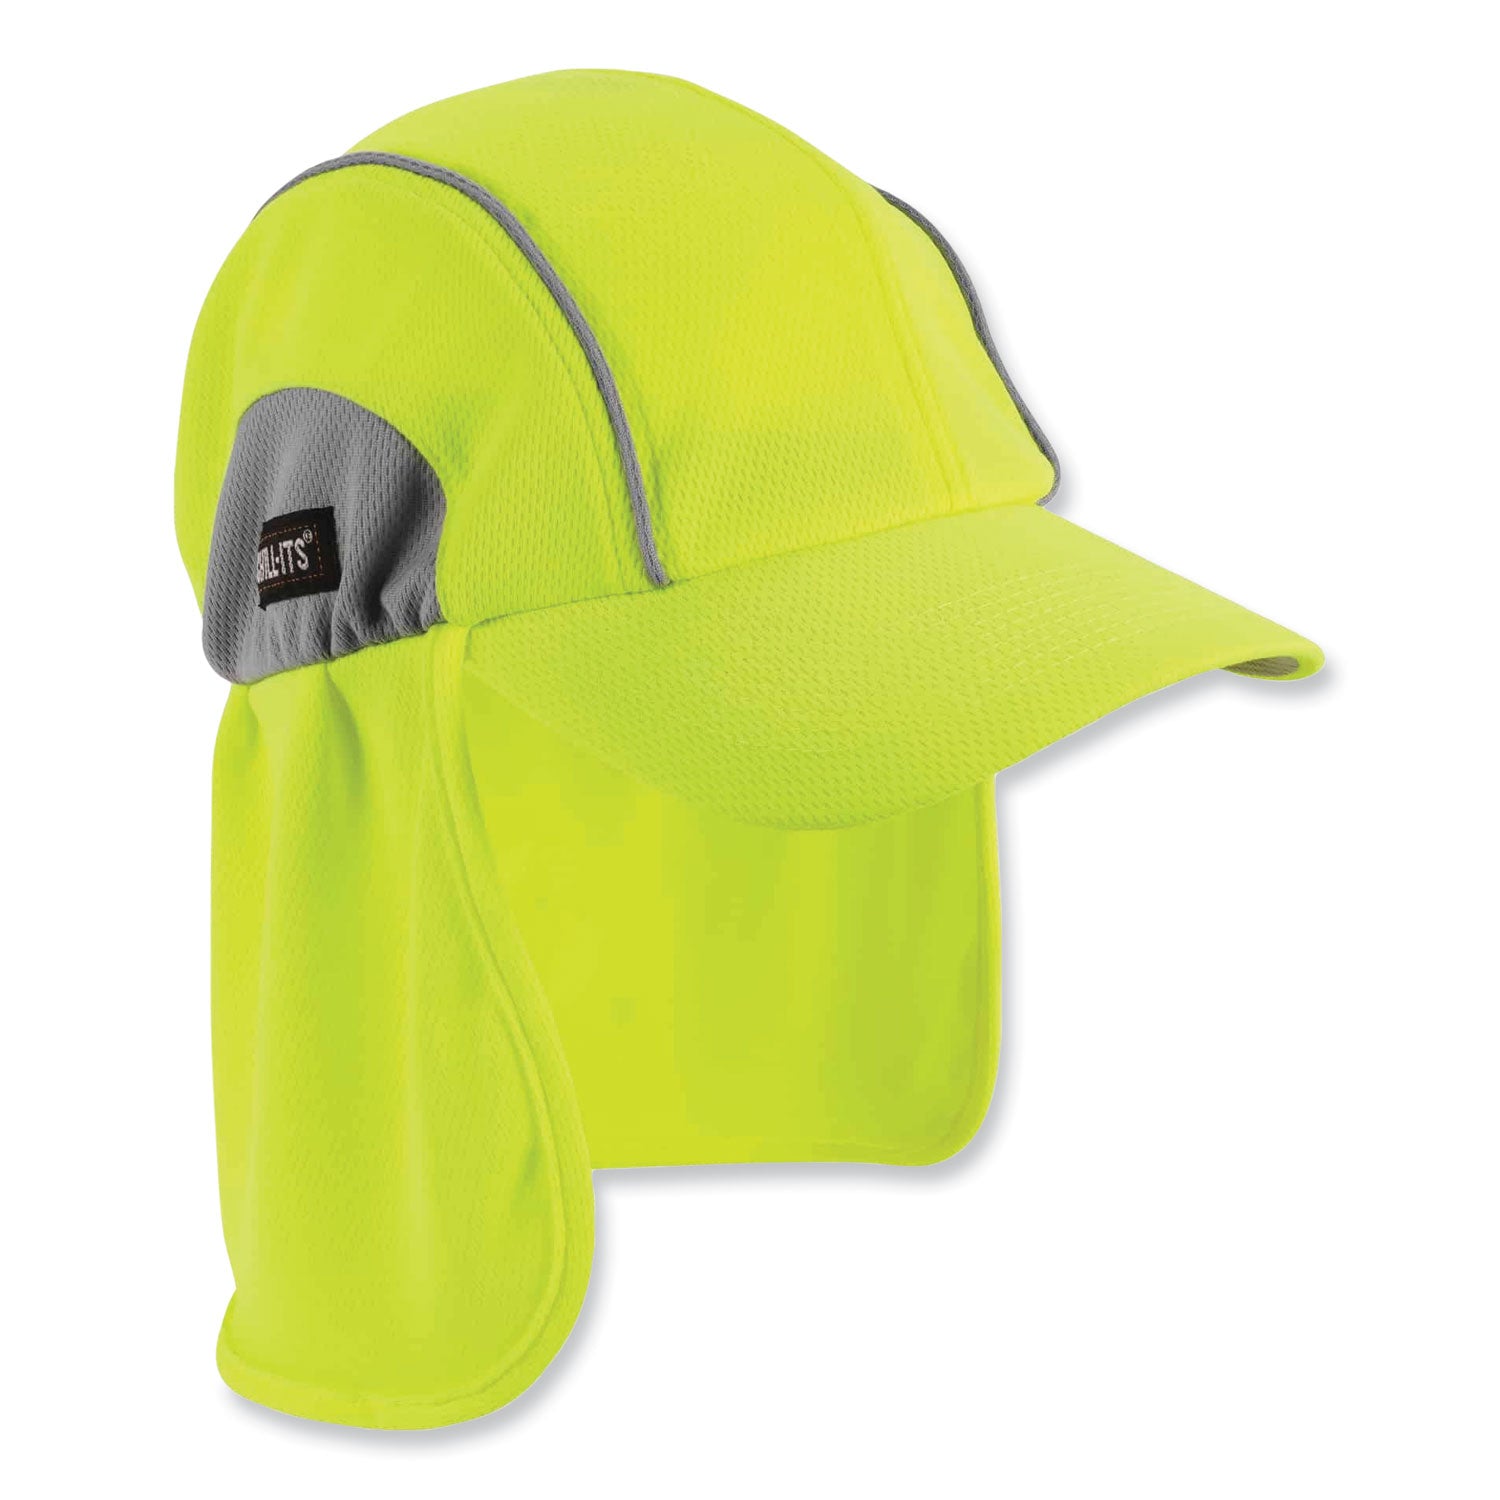 chill-its-6650-high-performance-hat-plus-neck-shade-polyester-one-size-fits-most-lime-ships-in-1-3-business-days_ego12520 - 1